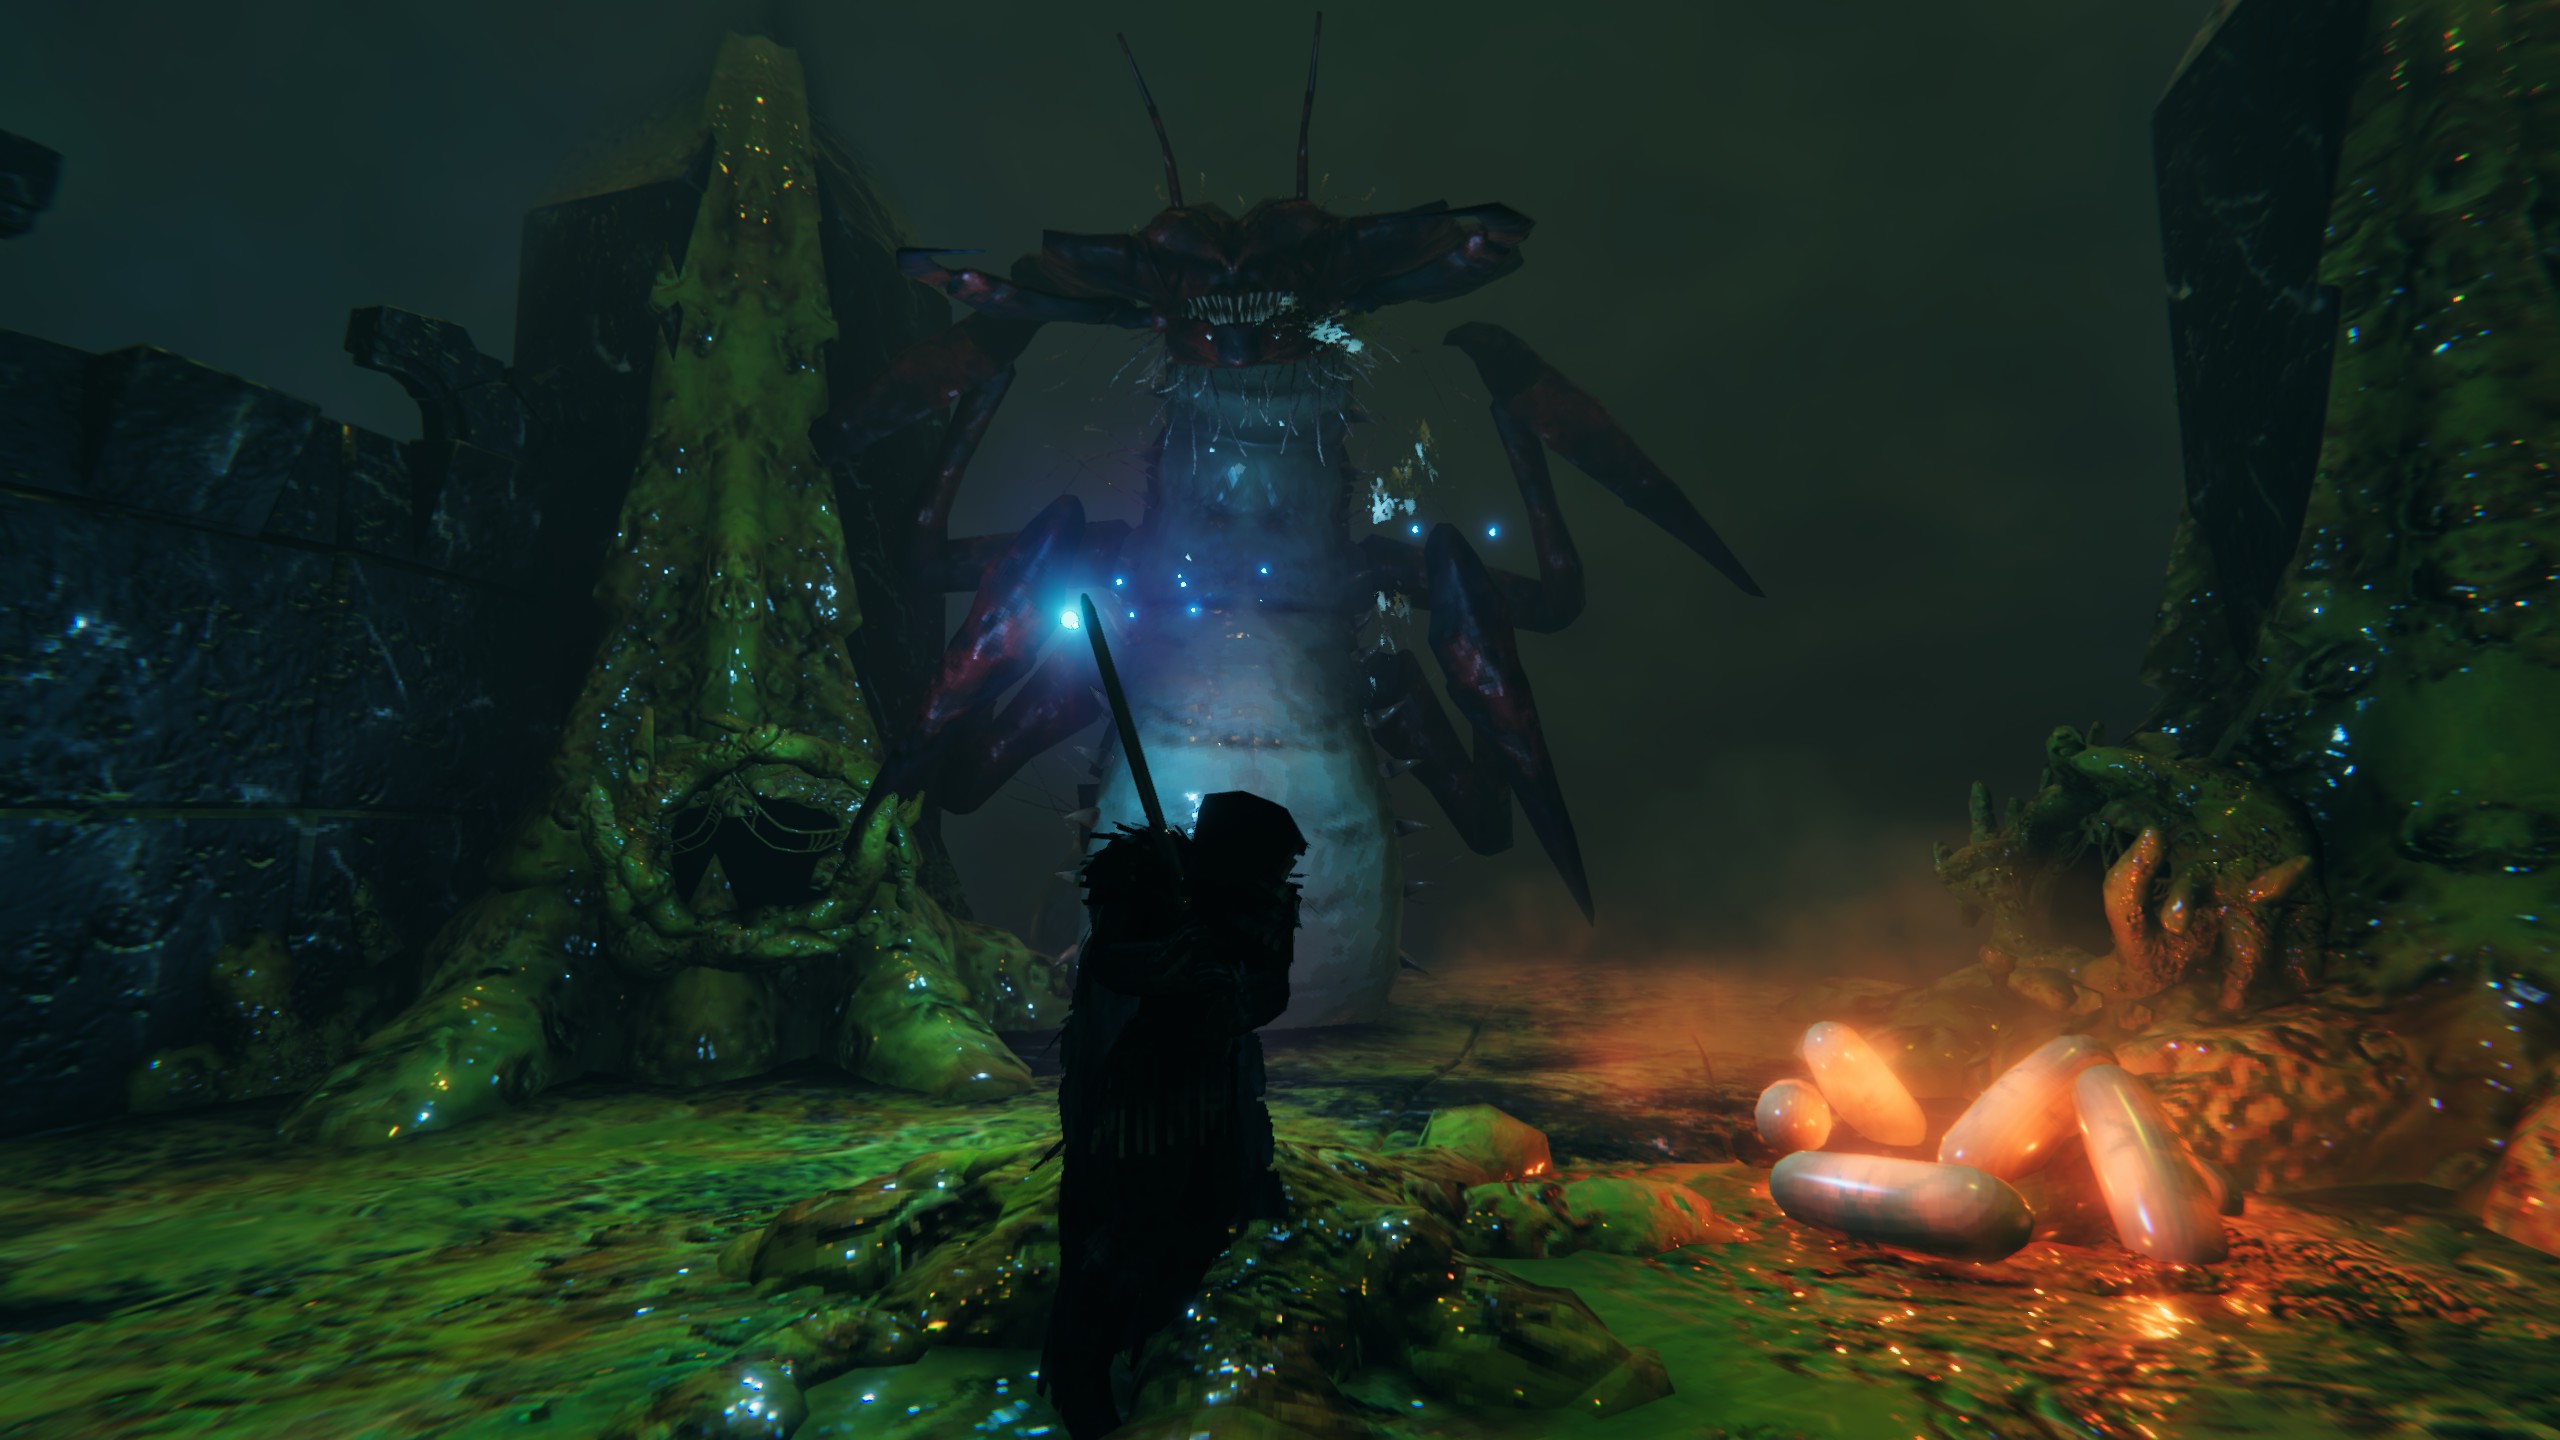 Valheim Mistlands Queen boss - a giant insect with four limbs and antennae stands before the player inside a dark hive.